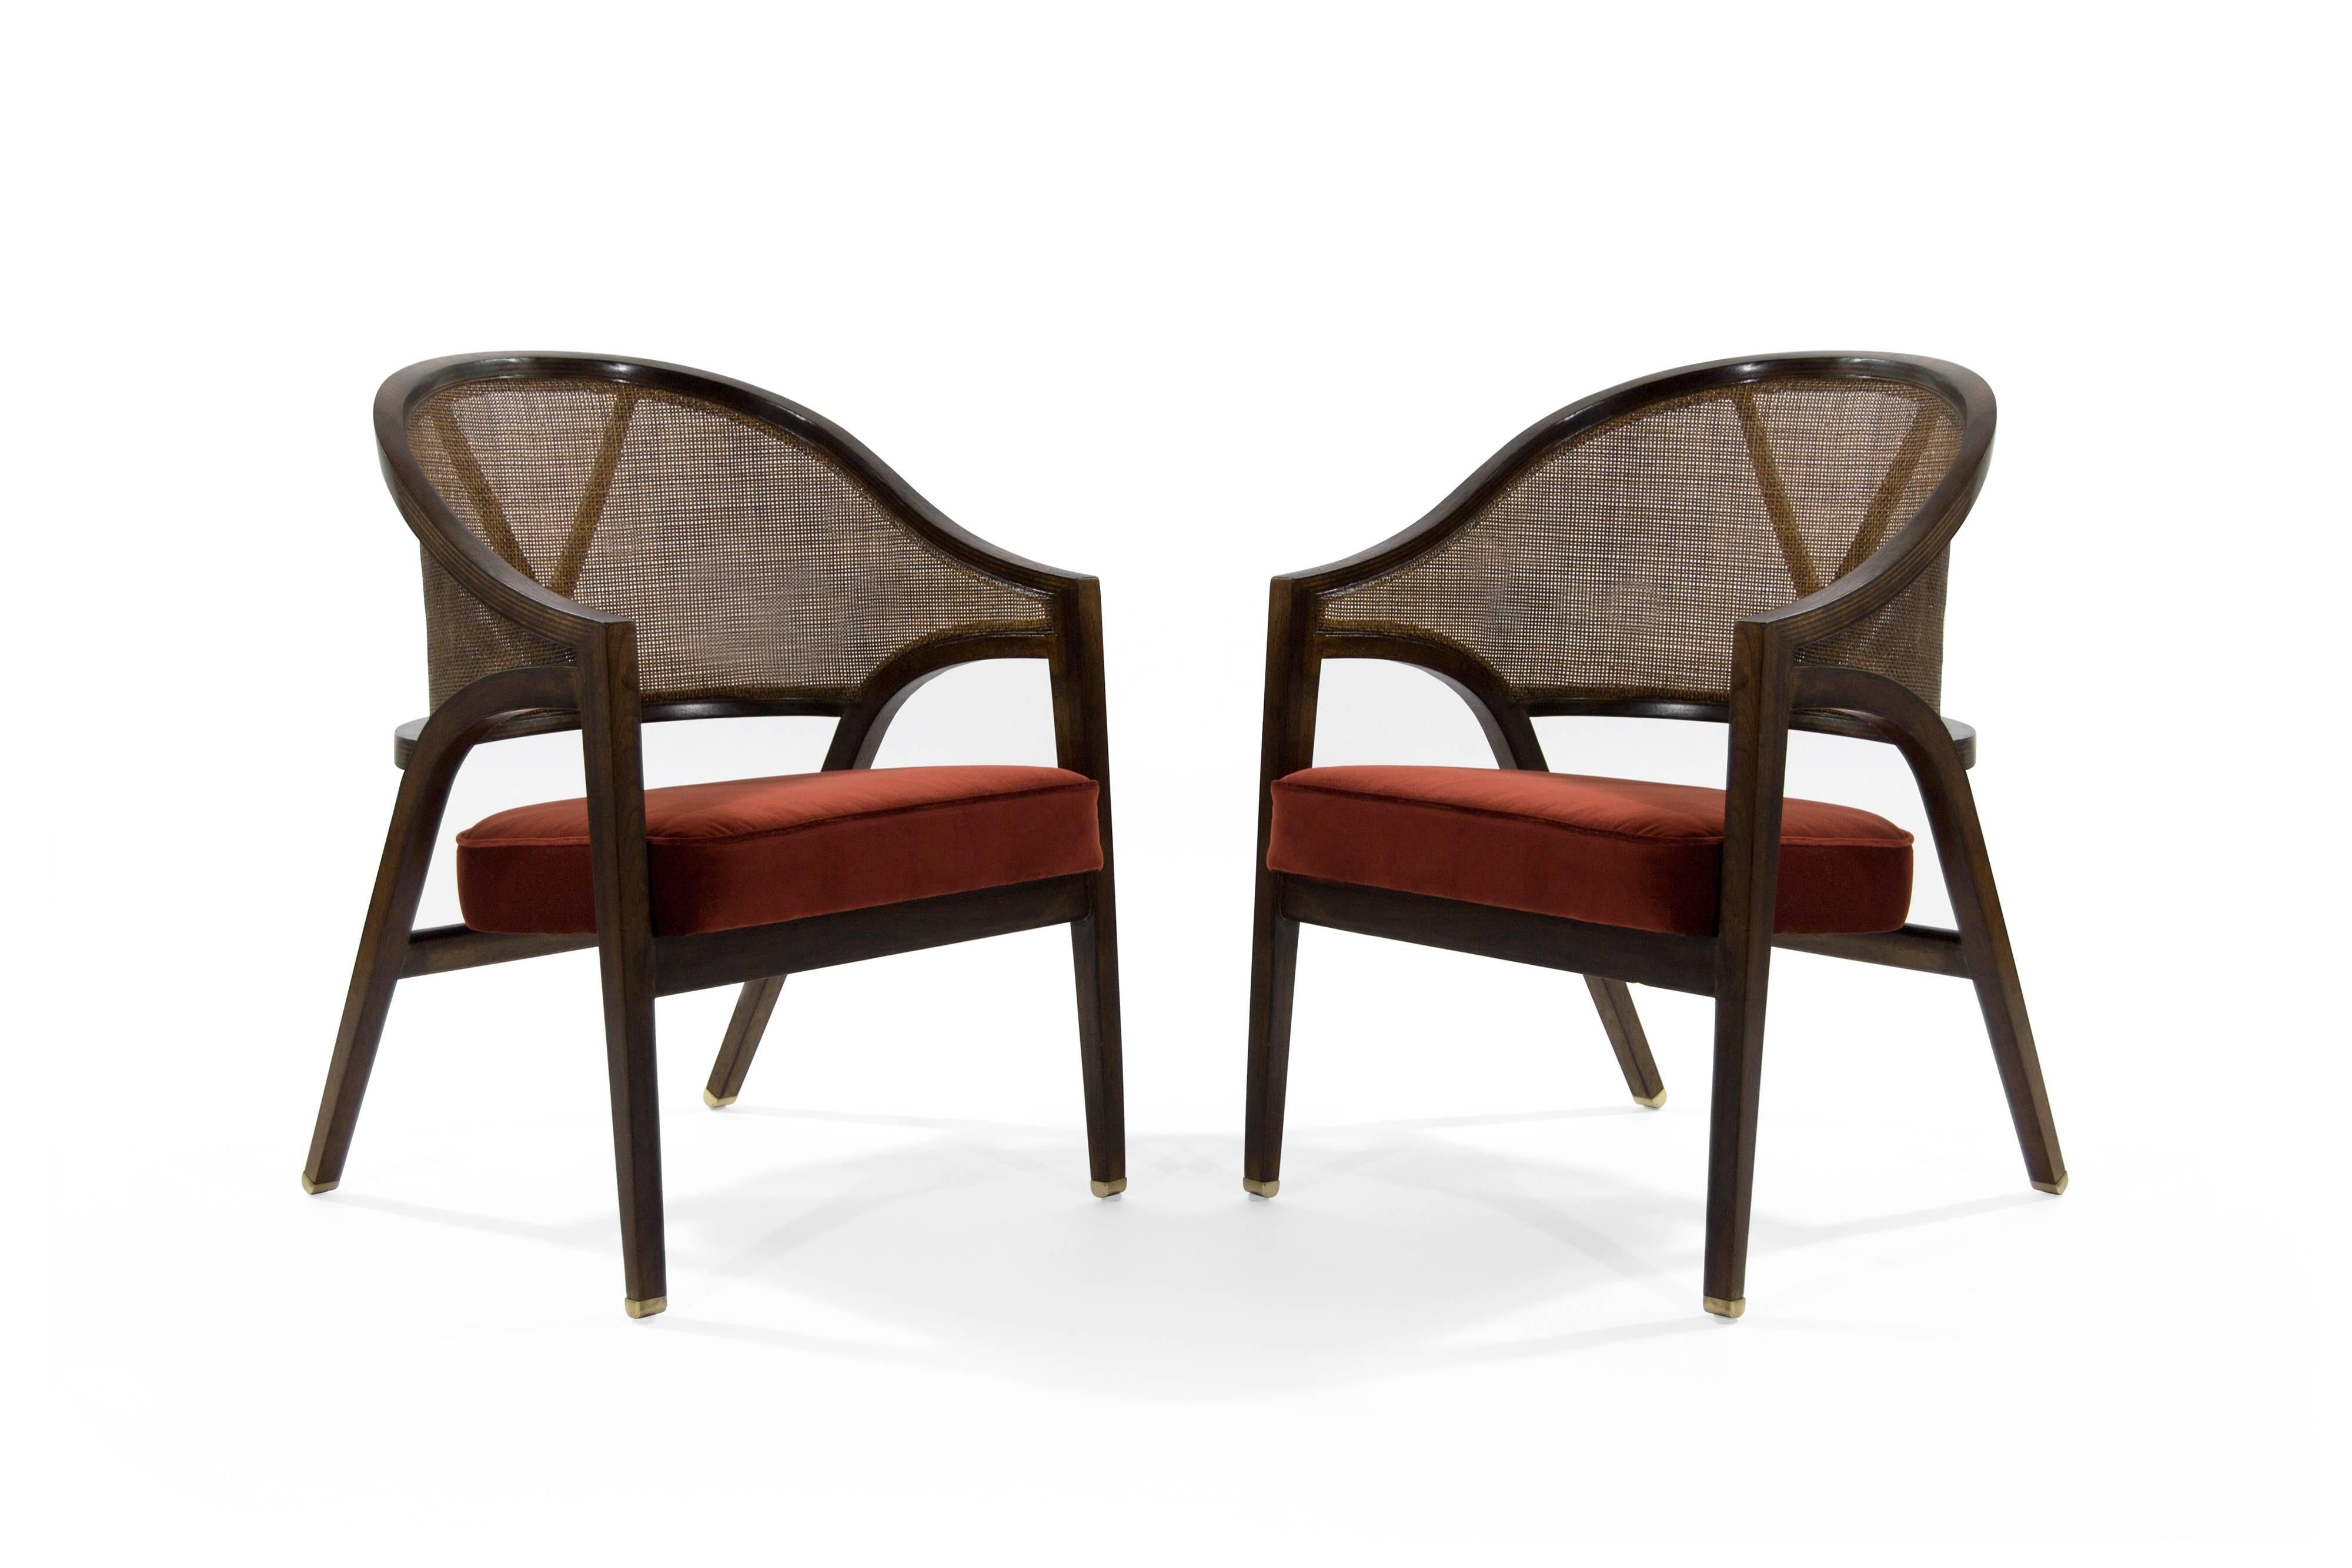 Exquisite and rare pair of armchairs labeled 